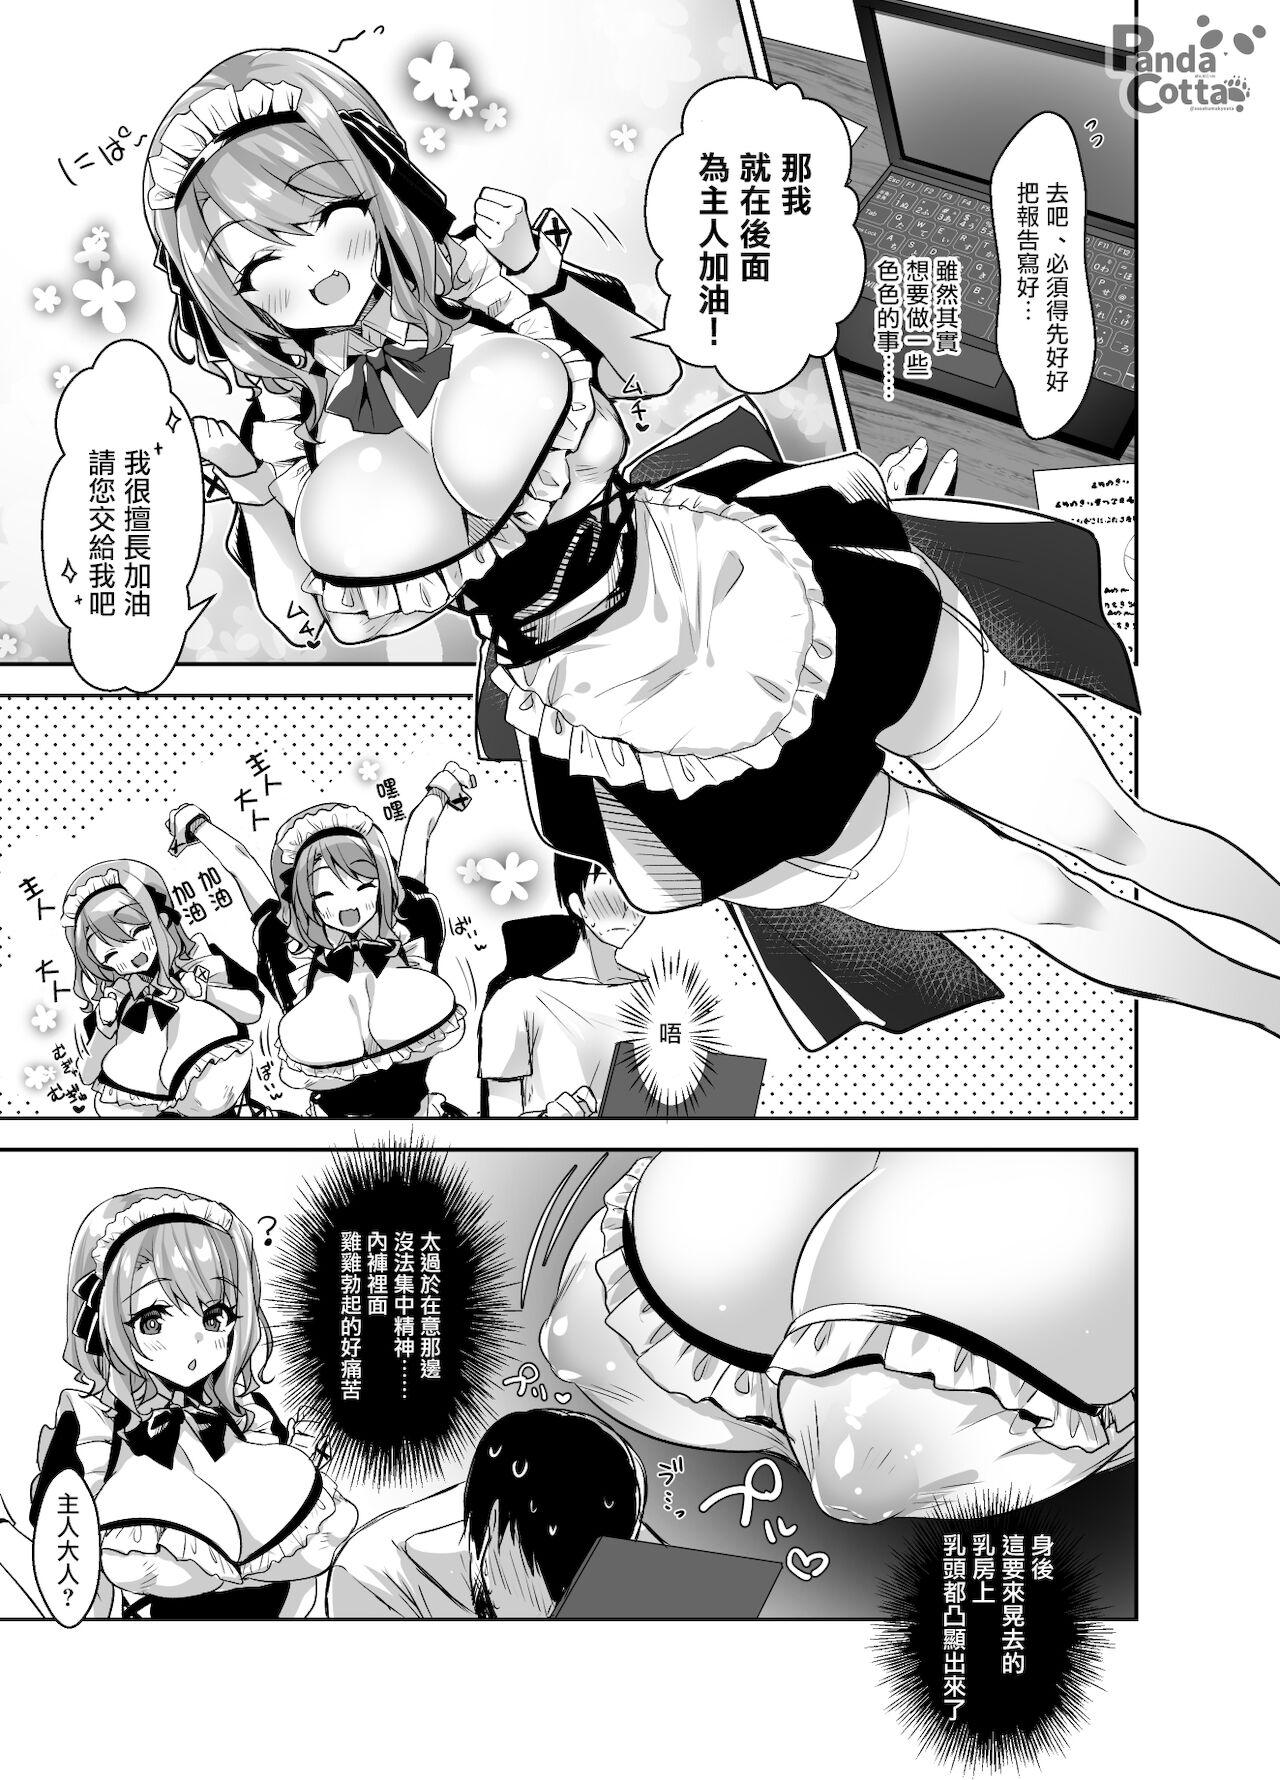 Girlongirl Oppai Maid Delivery - Original Closeups - Page 9